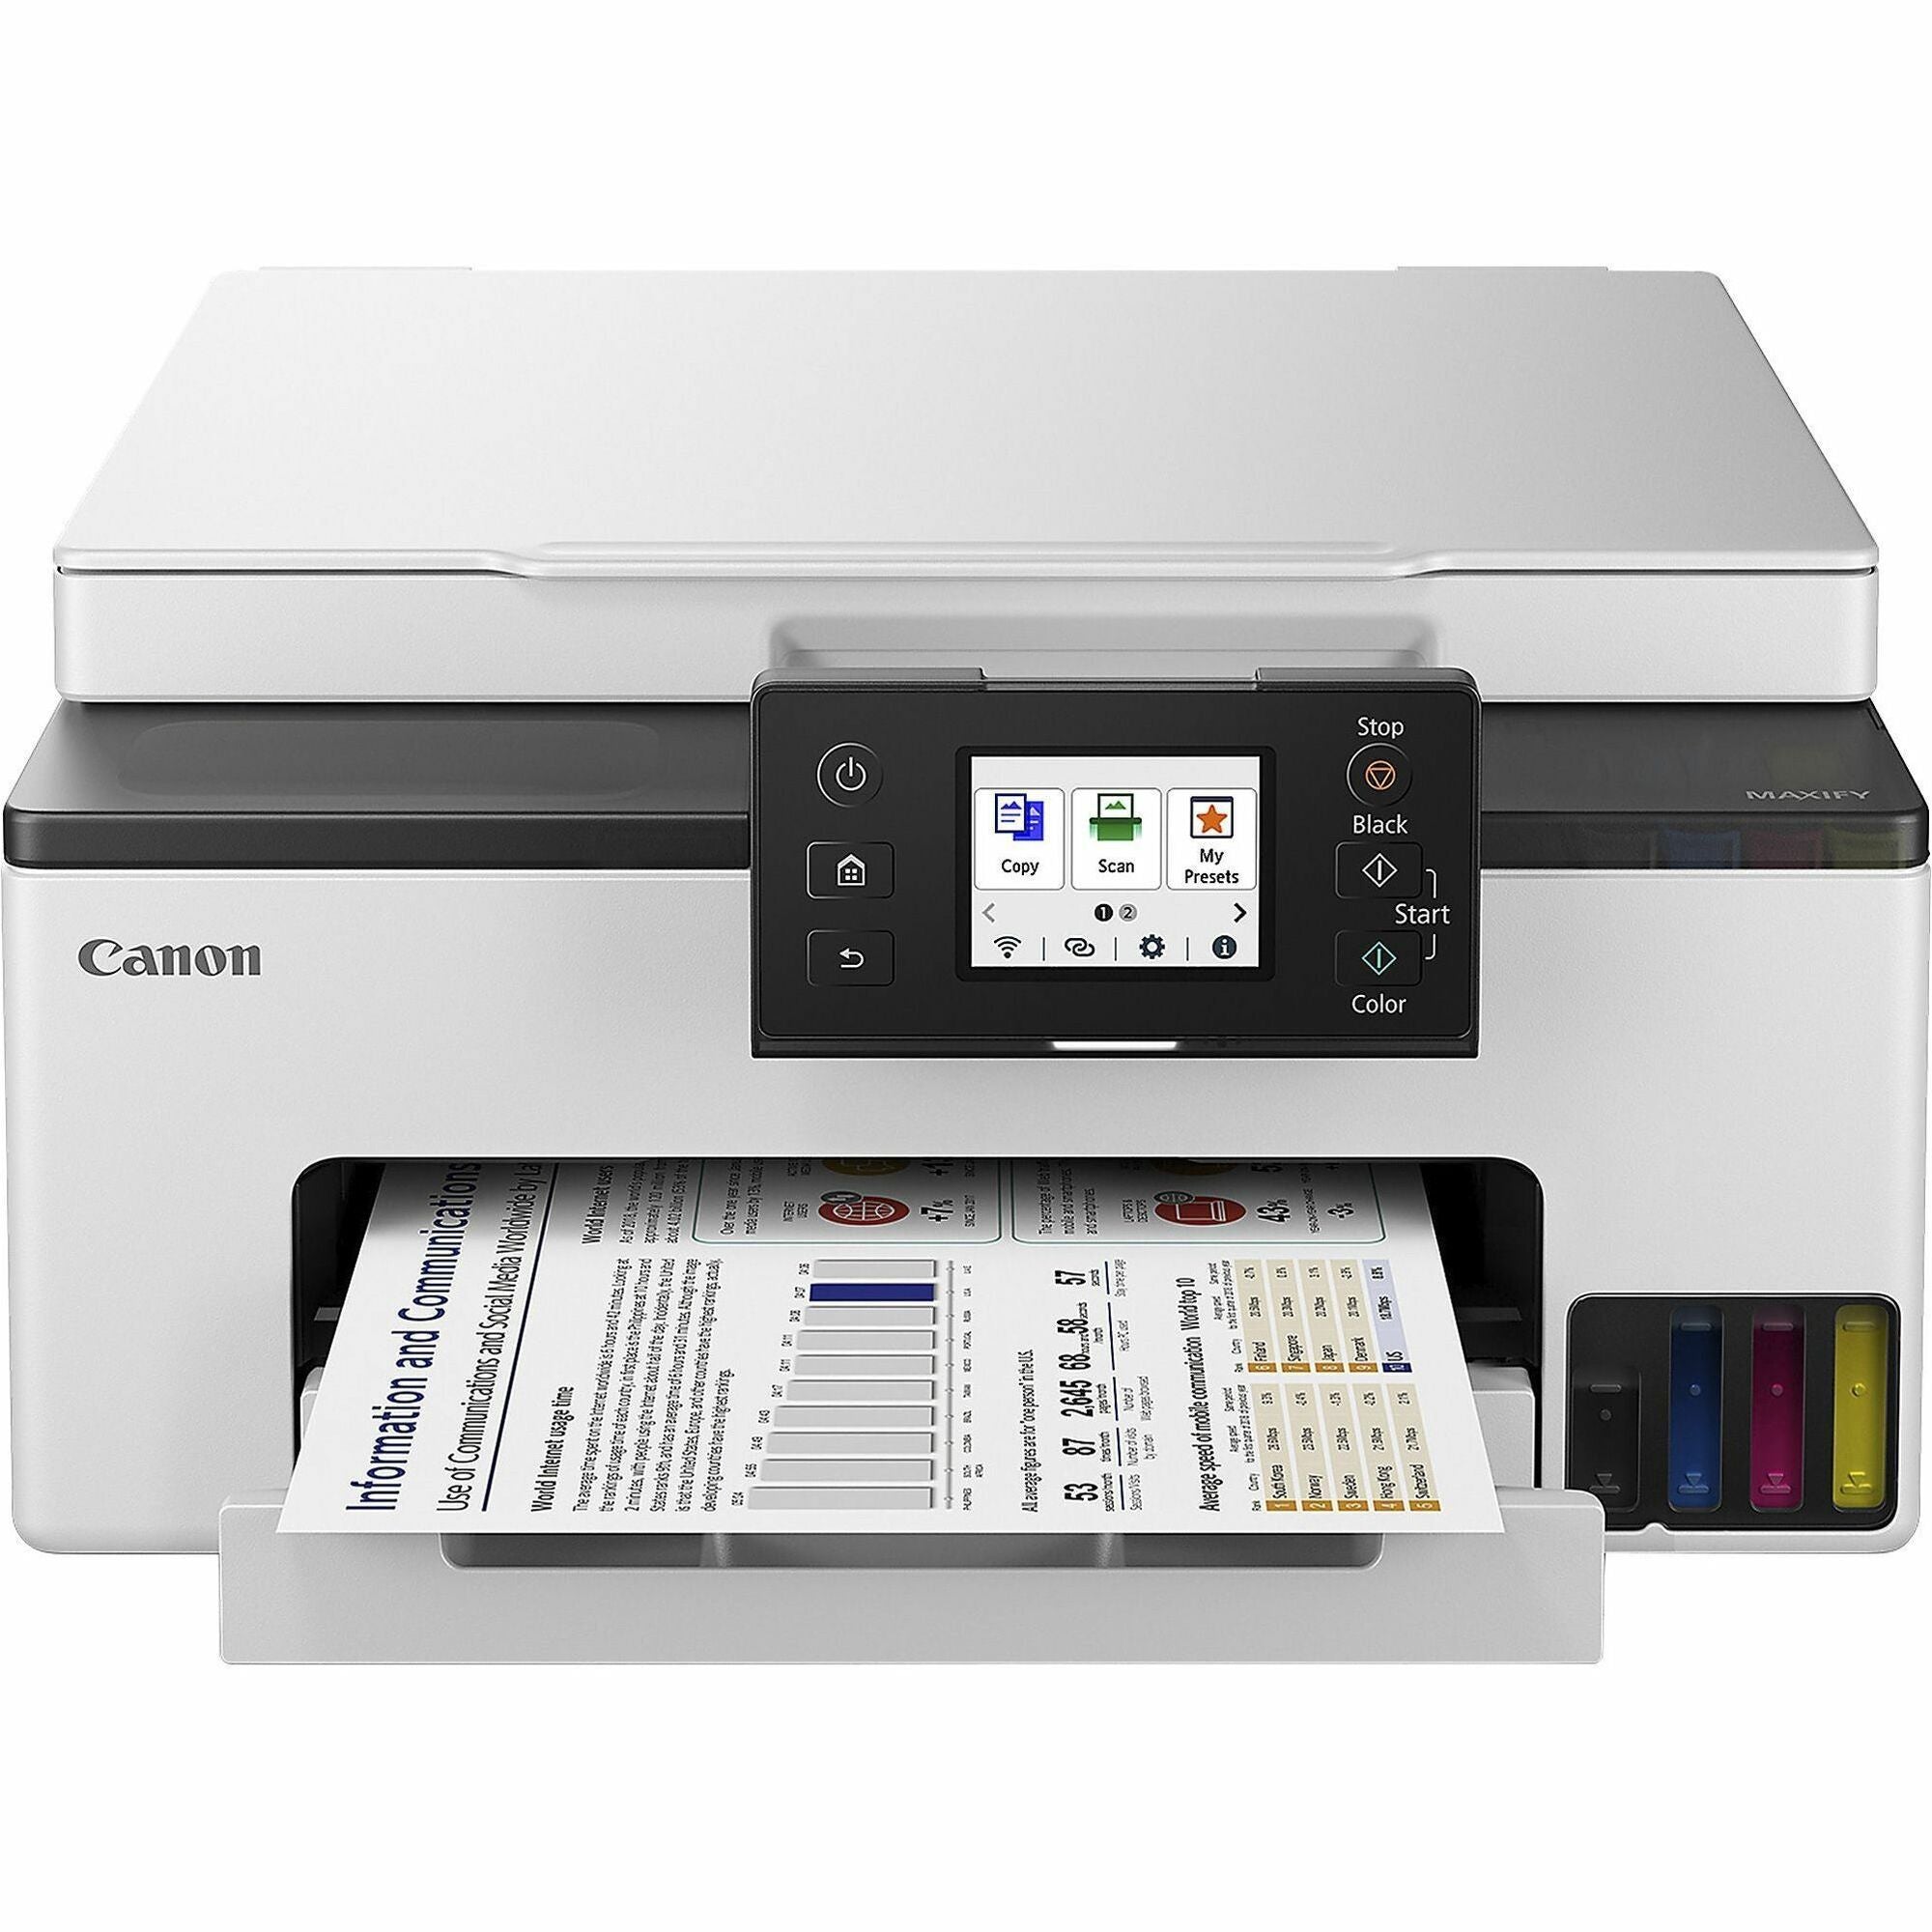 Canon MAXIFY GX1020 Wired & Wireless Inkjet Multifunction Printer - Color - White - Copier/Printer/Scanner - 600 x 1200 dpi Print - Up to 27000 Pages Monthly - Flatbed Scanner - Ethernet Ethernet - Wireless LAN - Canon PRINT Application, Apple AirPri - 1